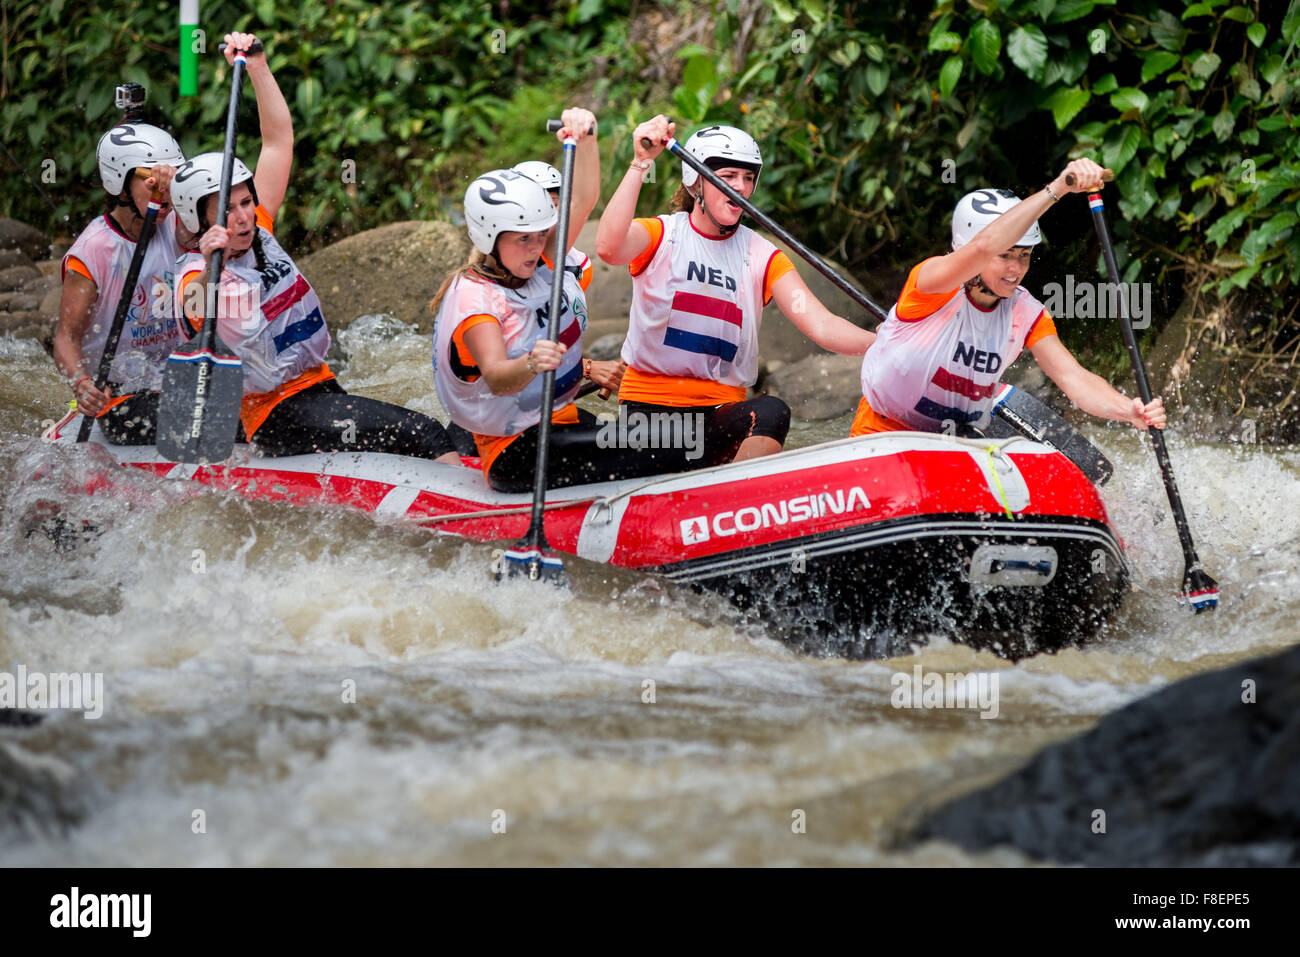 Netherlands open women's team during sprint race category on 2015 World Rafting Championship. Stock Photo